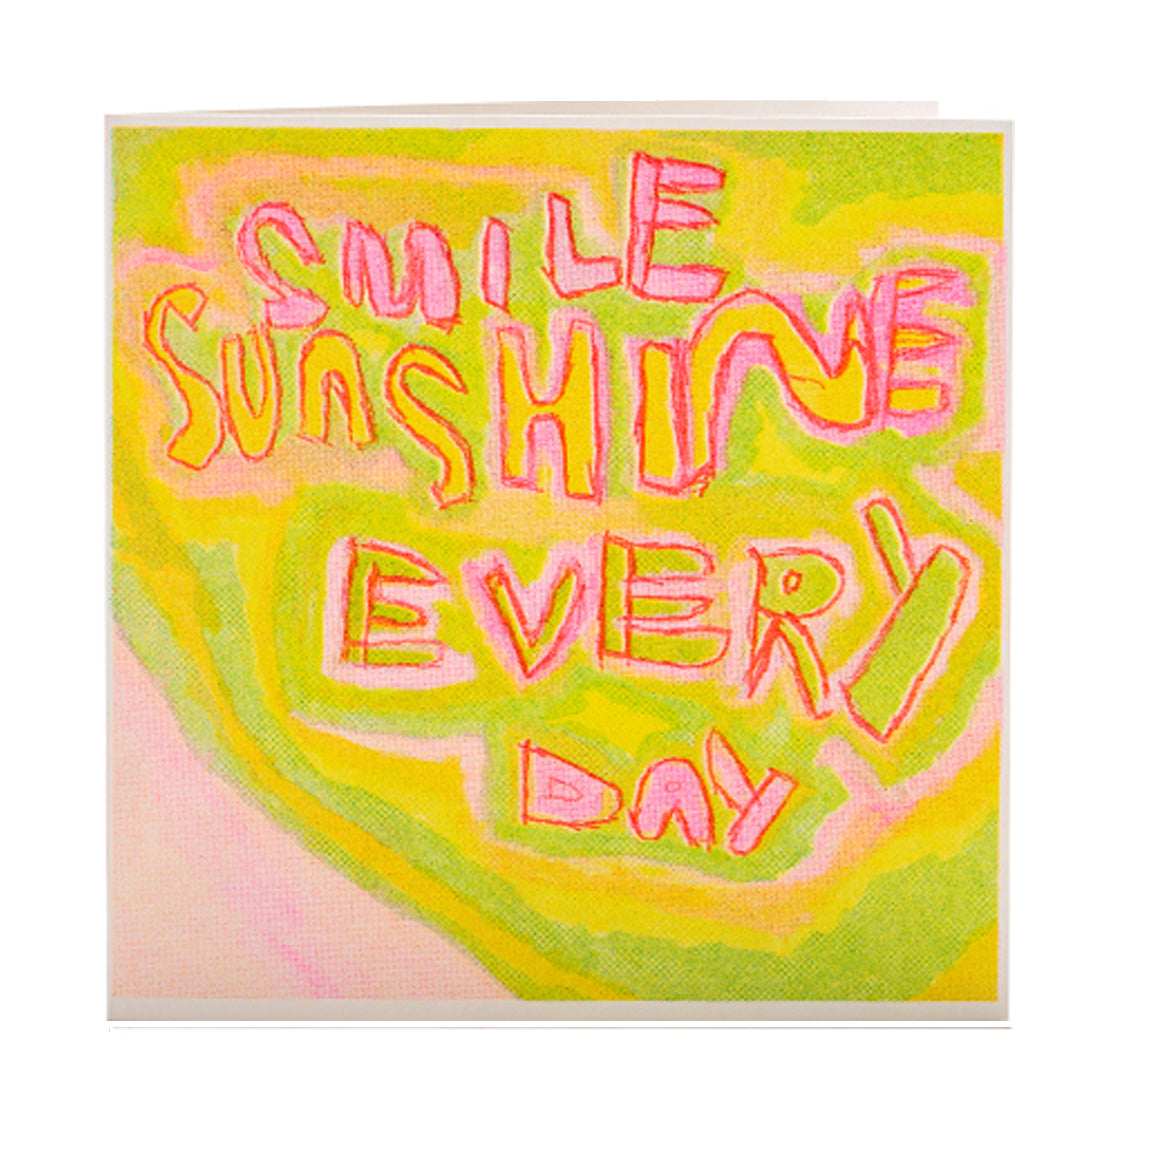 Smile Sunshine Every Day Greeting Card